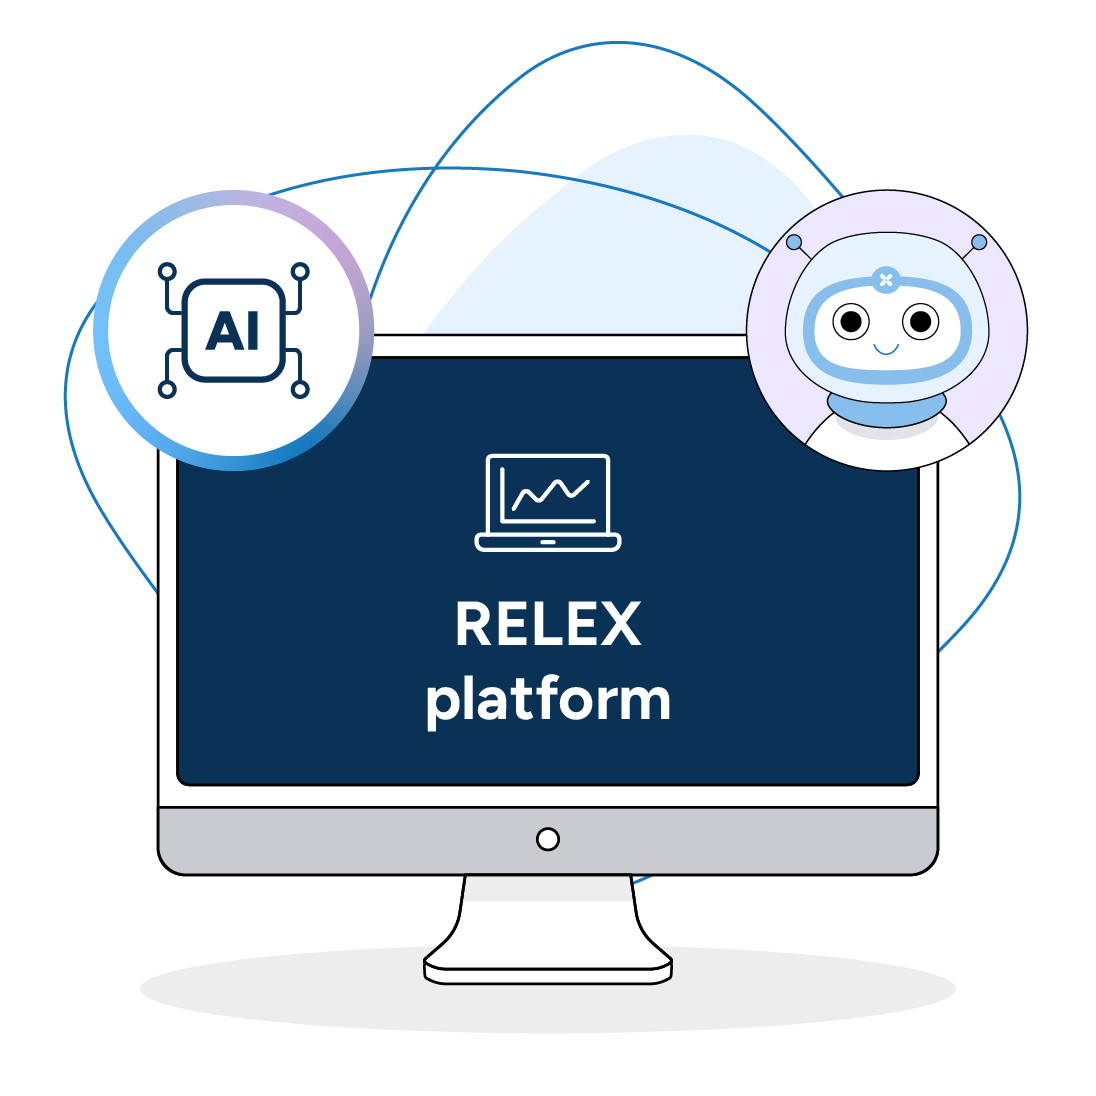 An illustration of the RELEX platform, where you can plan, balance, and optimize your end-to-end supply chain.